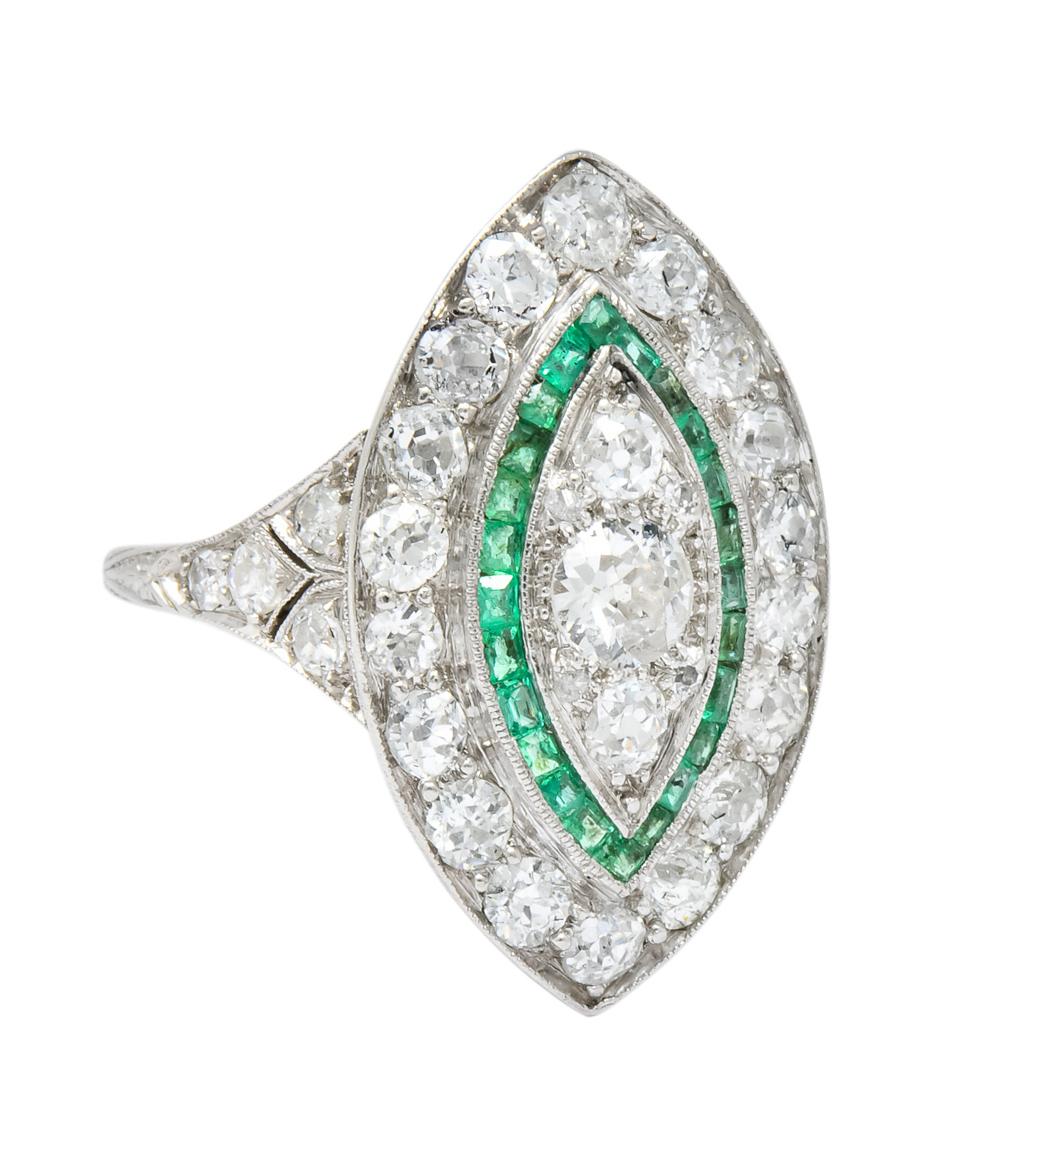 Designed as navette style dinner ring set throughout with old European cut diamonds weighing approximately 2.45 carats total, I/J color and VS to SI clarity

Accented by channel set calibré cut emeralds weighing approximately 0.50 carat total,